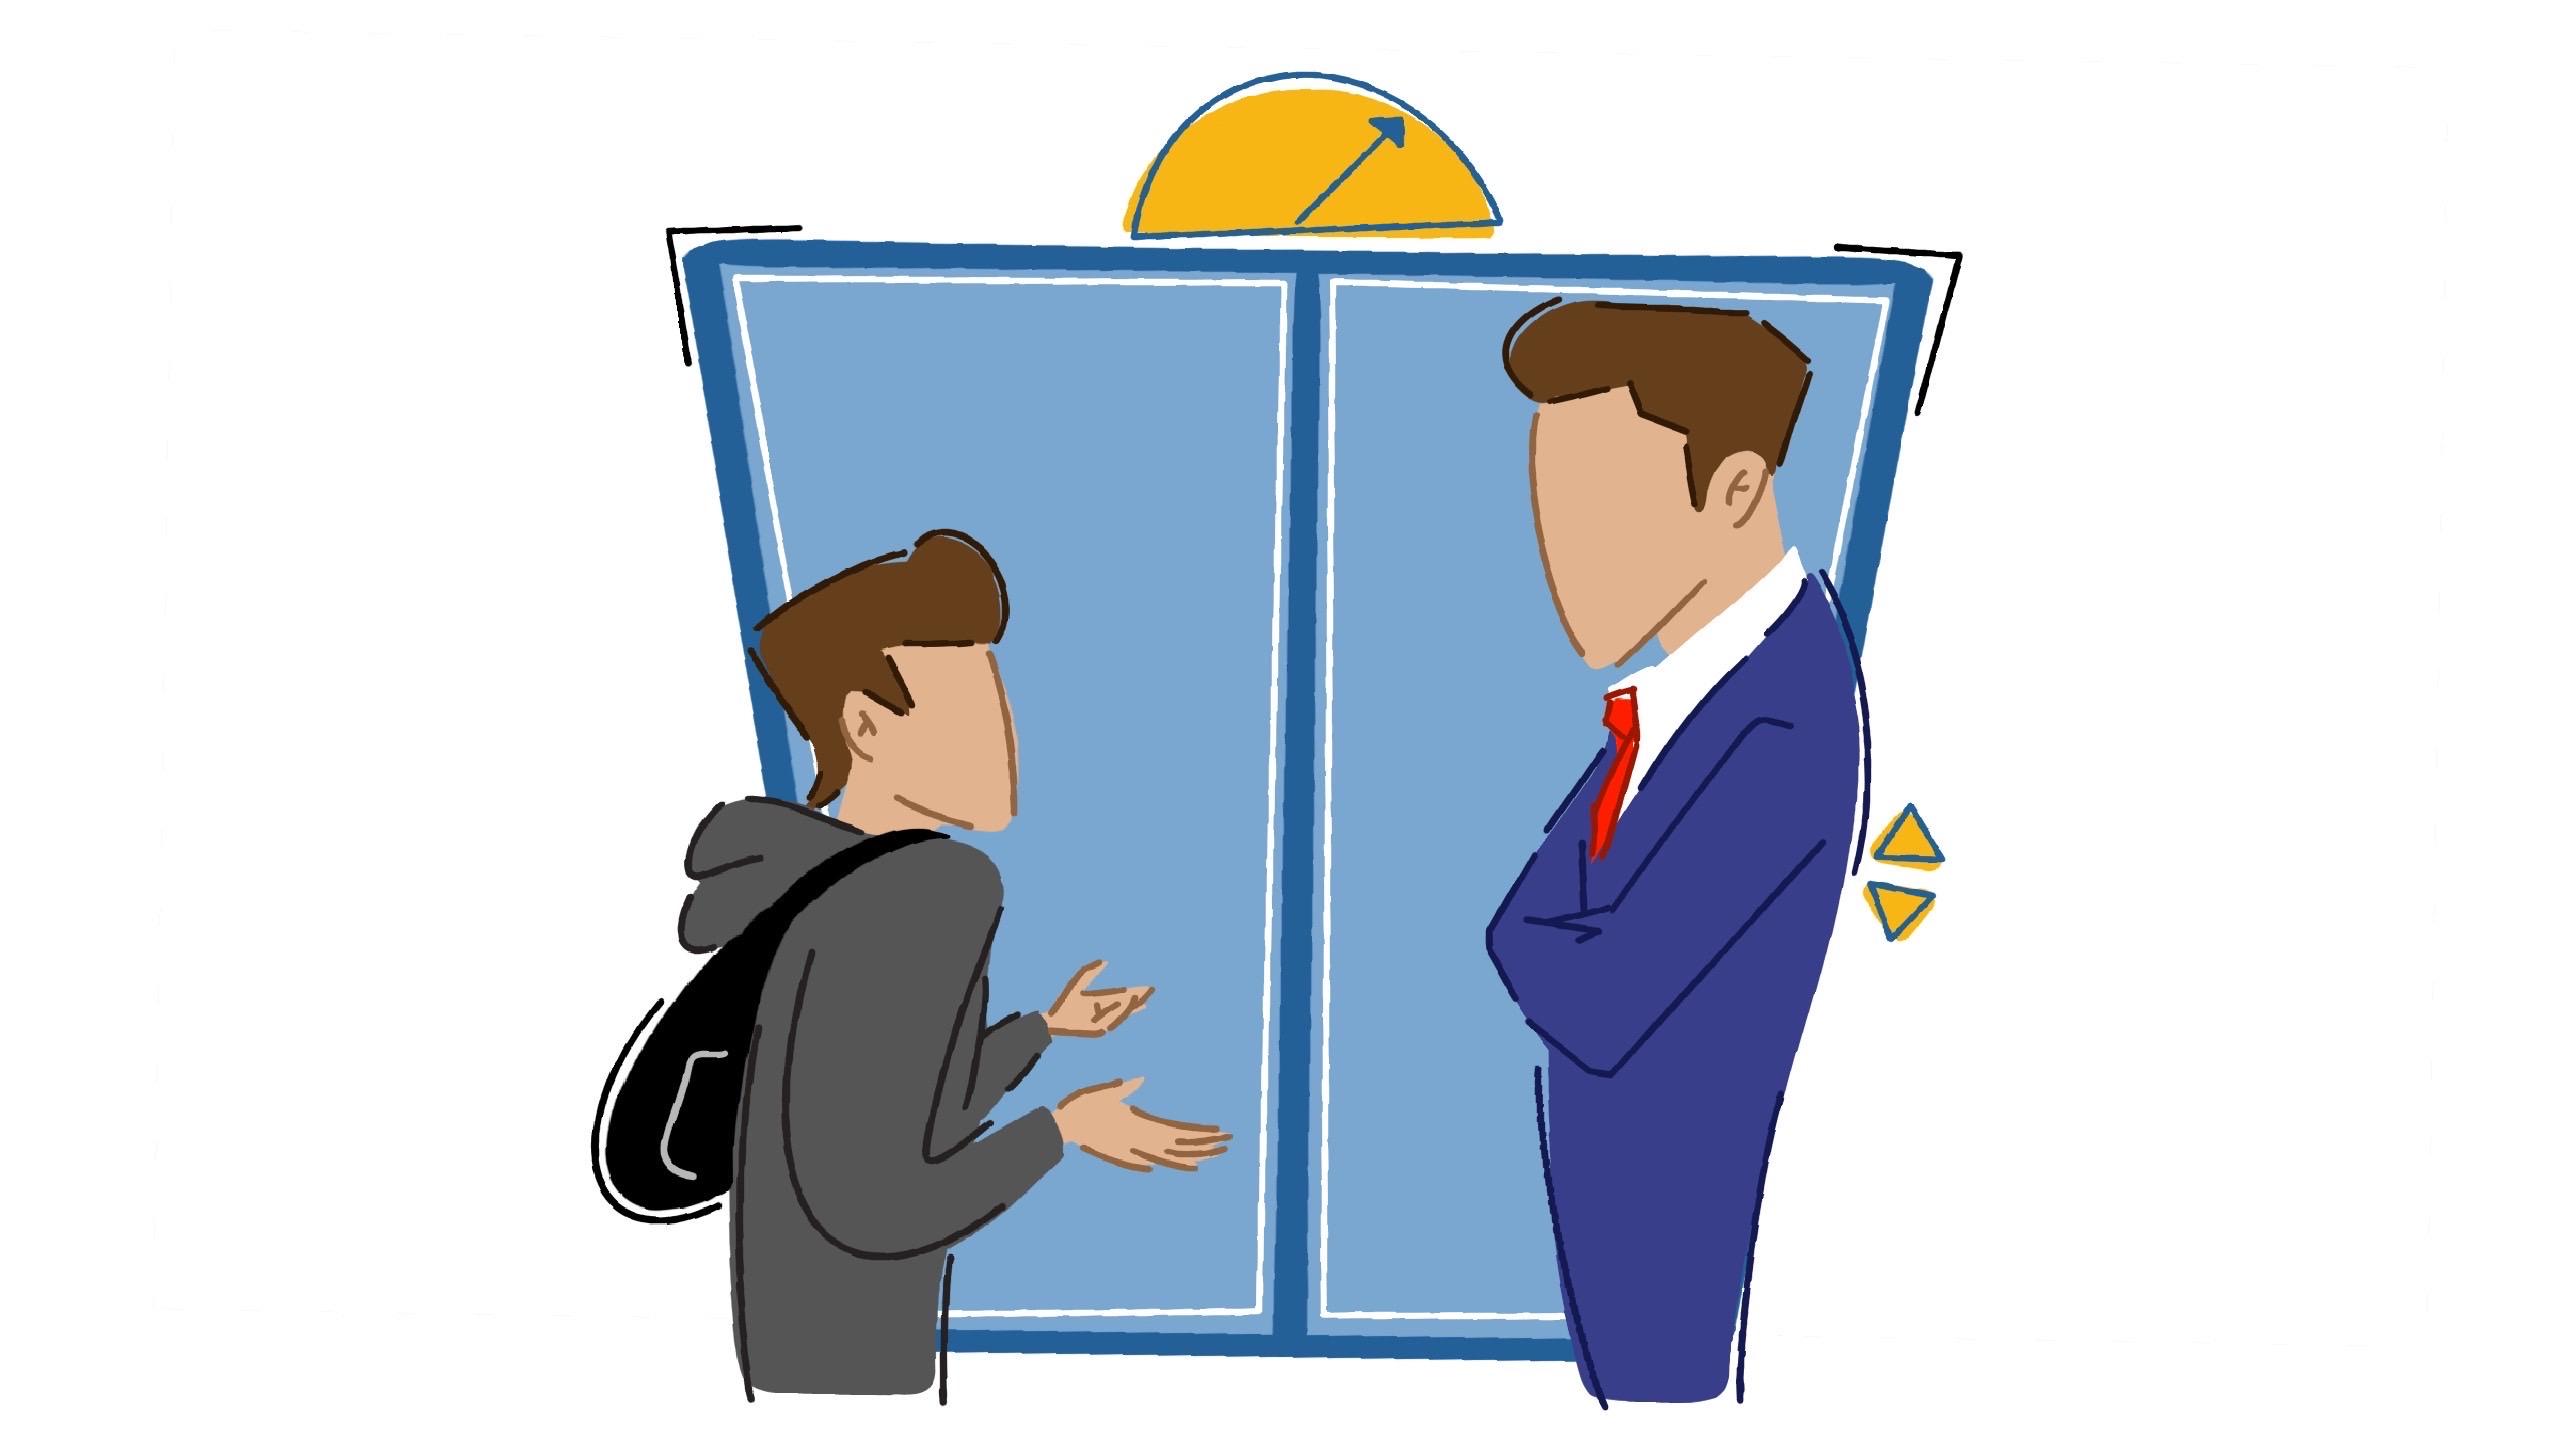 an illustration of two people outside an elevator, one has a backpack and talking to the one on the right who has their arms crossed